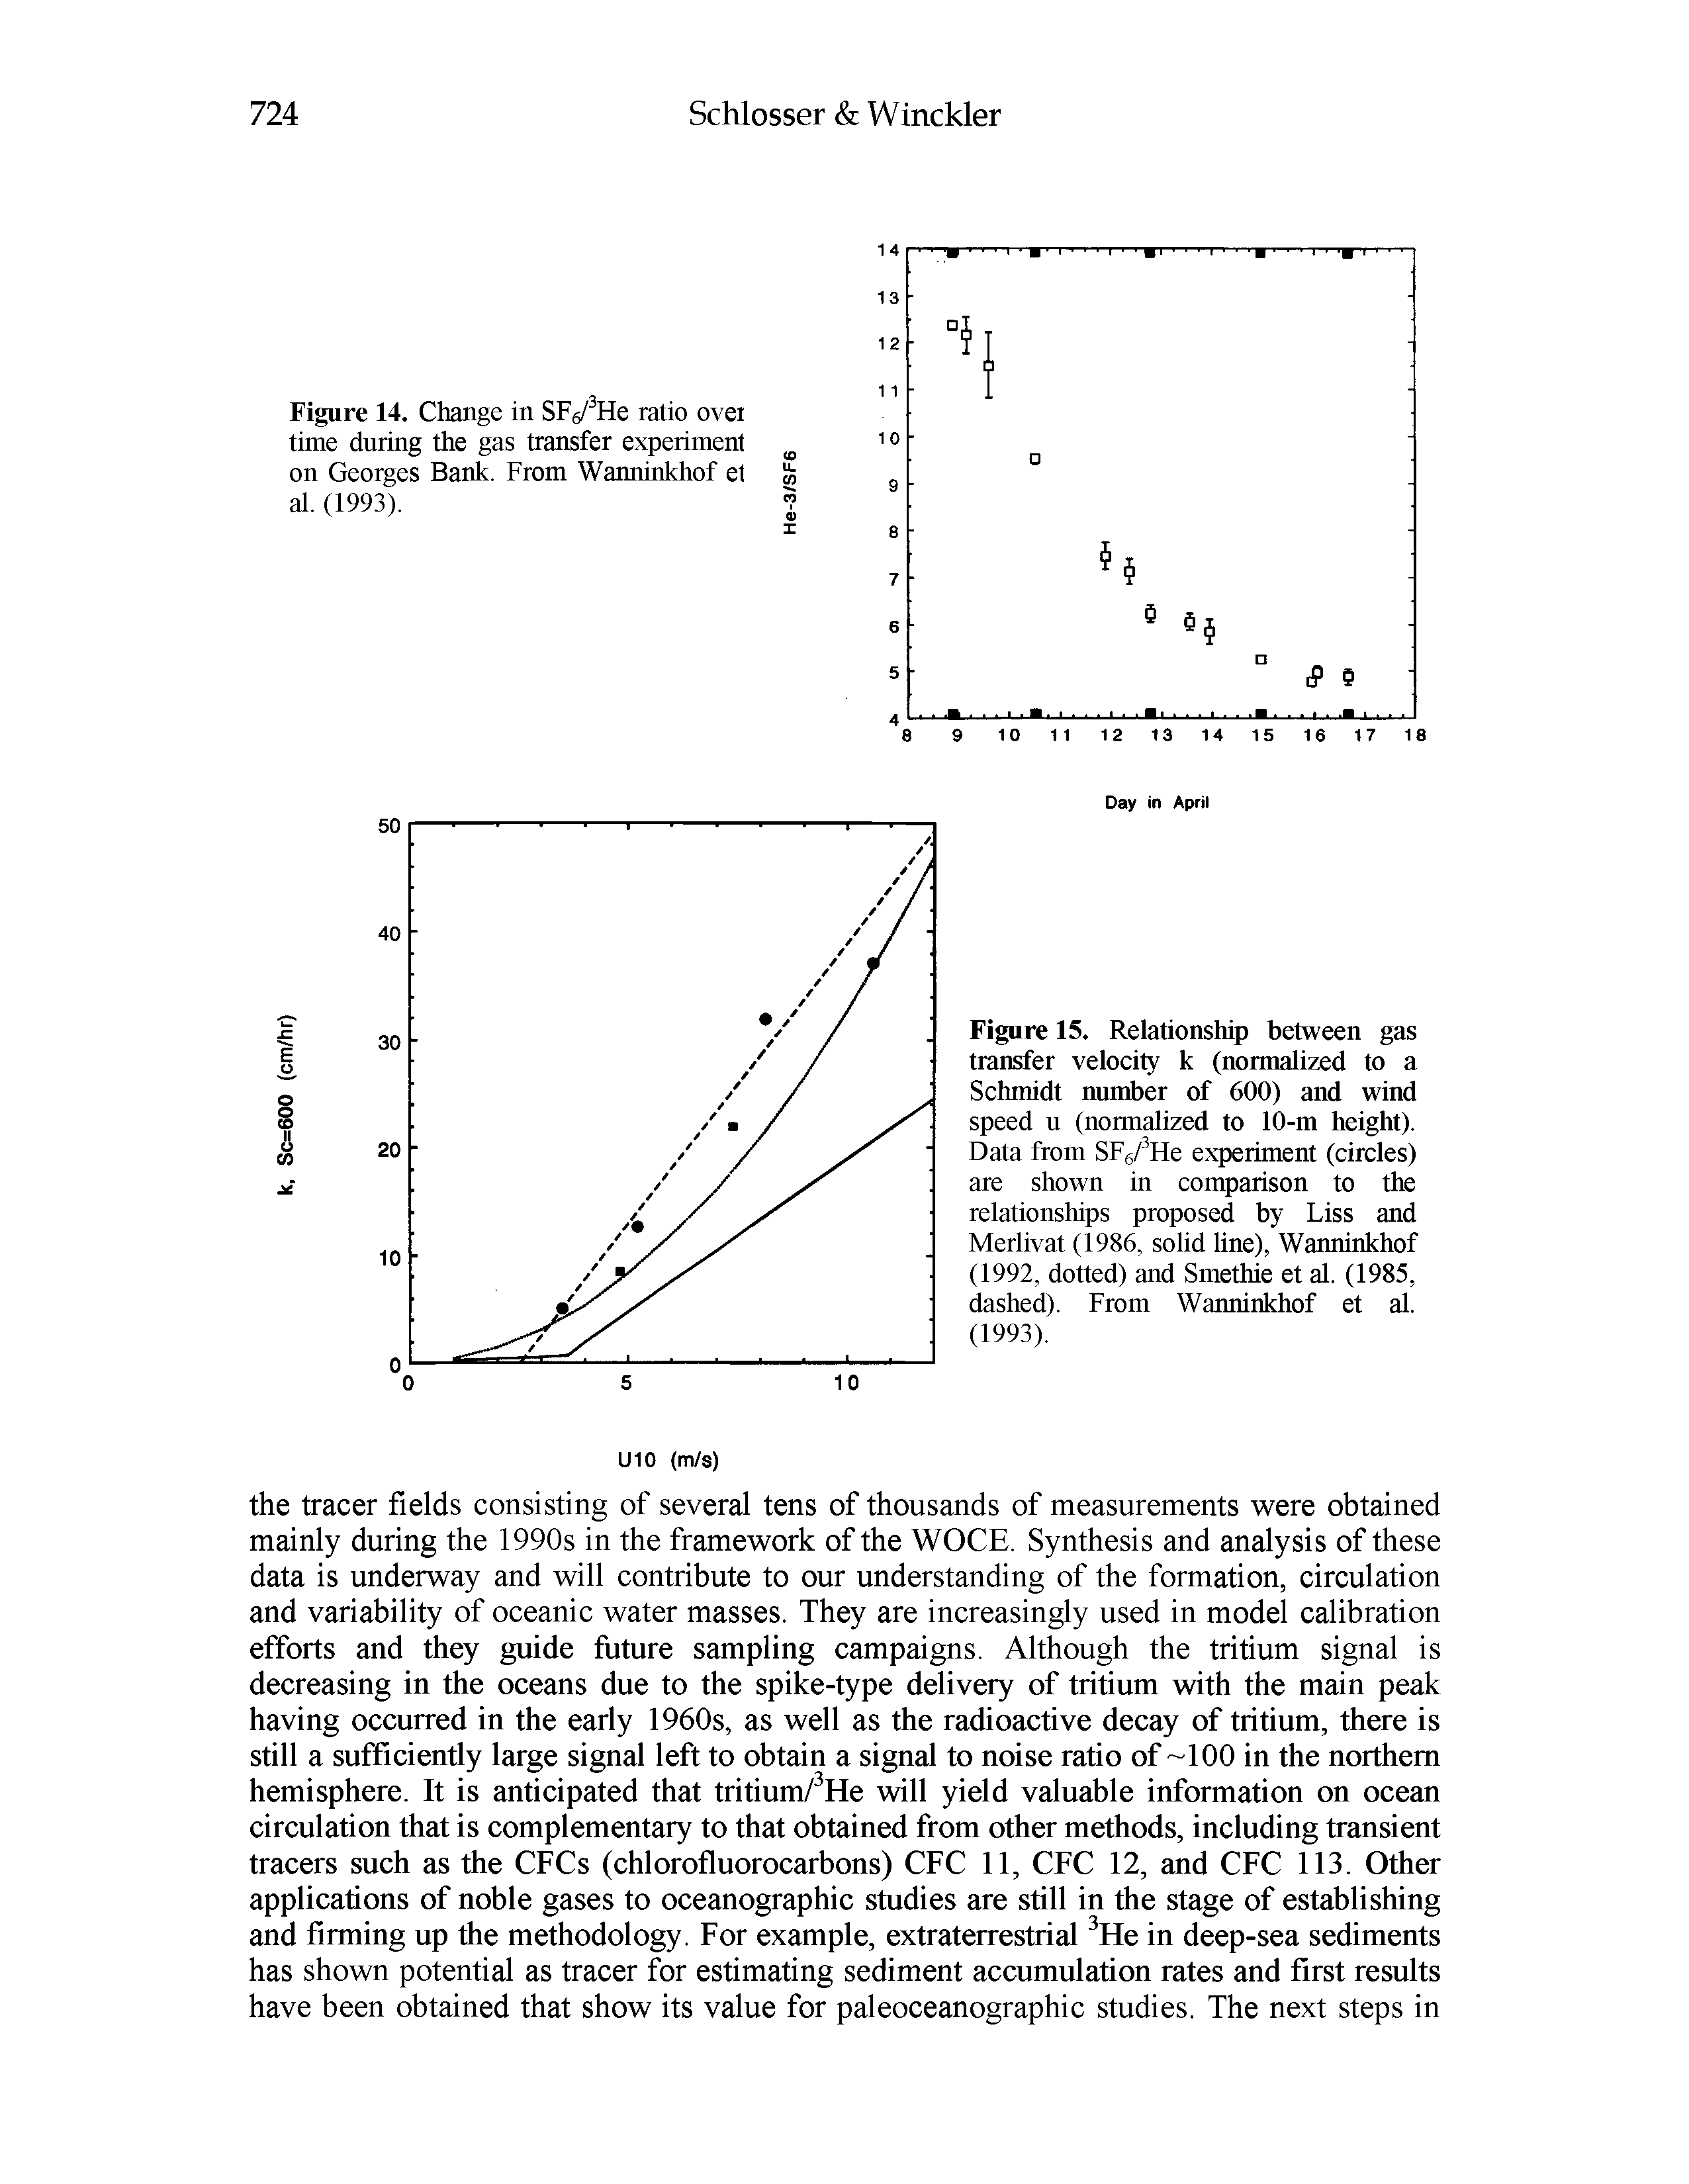 Figure 14. Change in SFe/ He ratio over time during the gas transfer experiment on Georges Bank. From Wanninkhof el al. (1993).